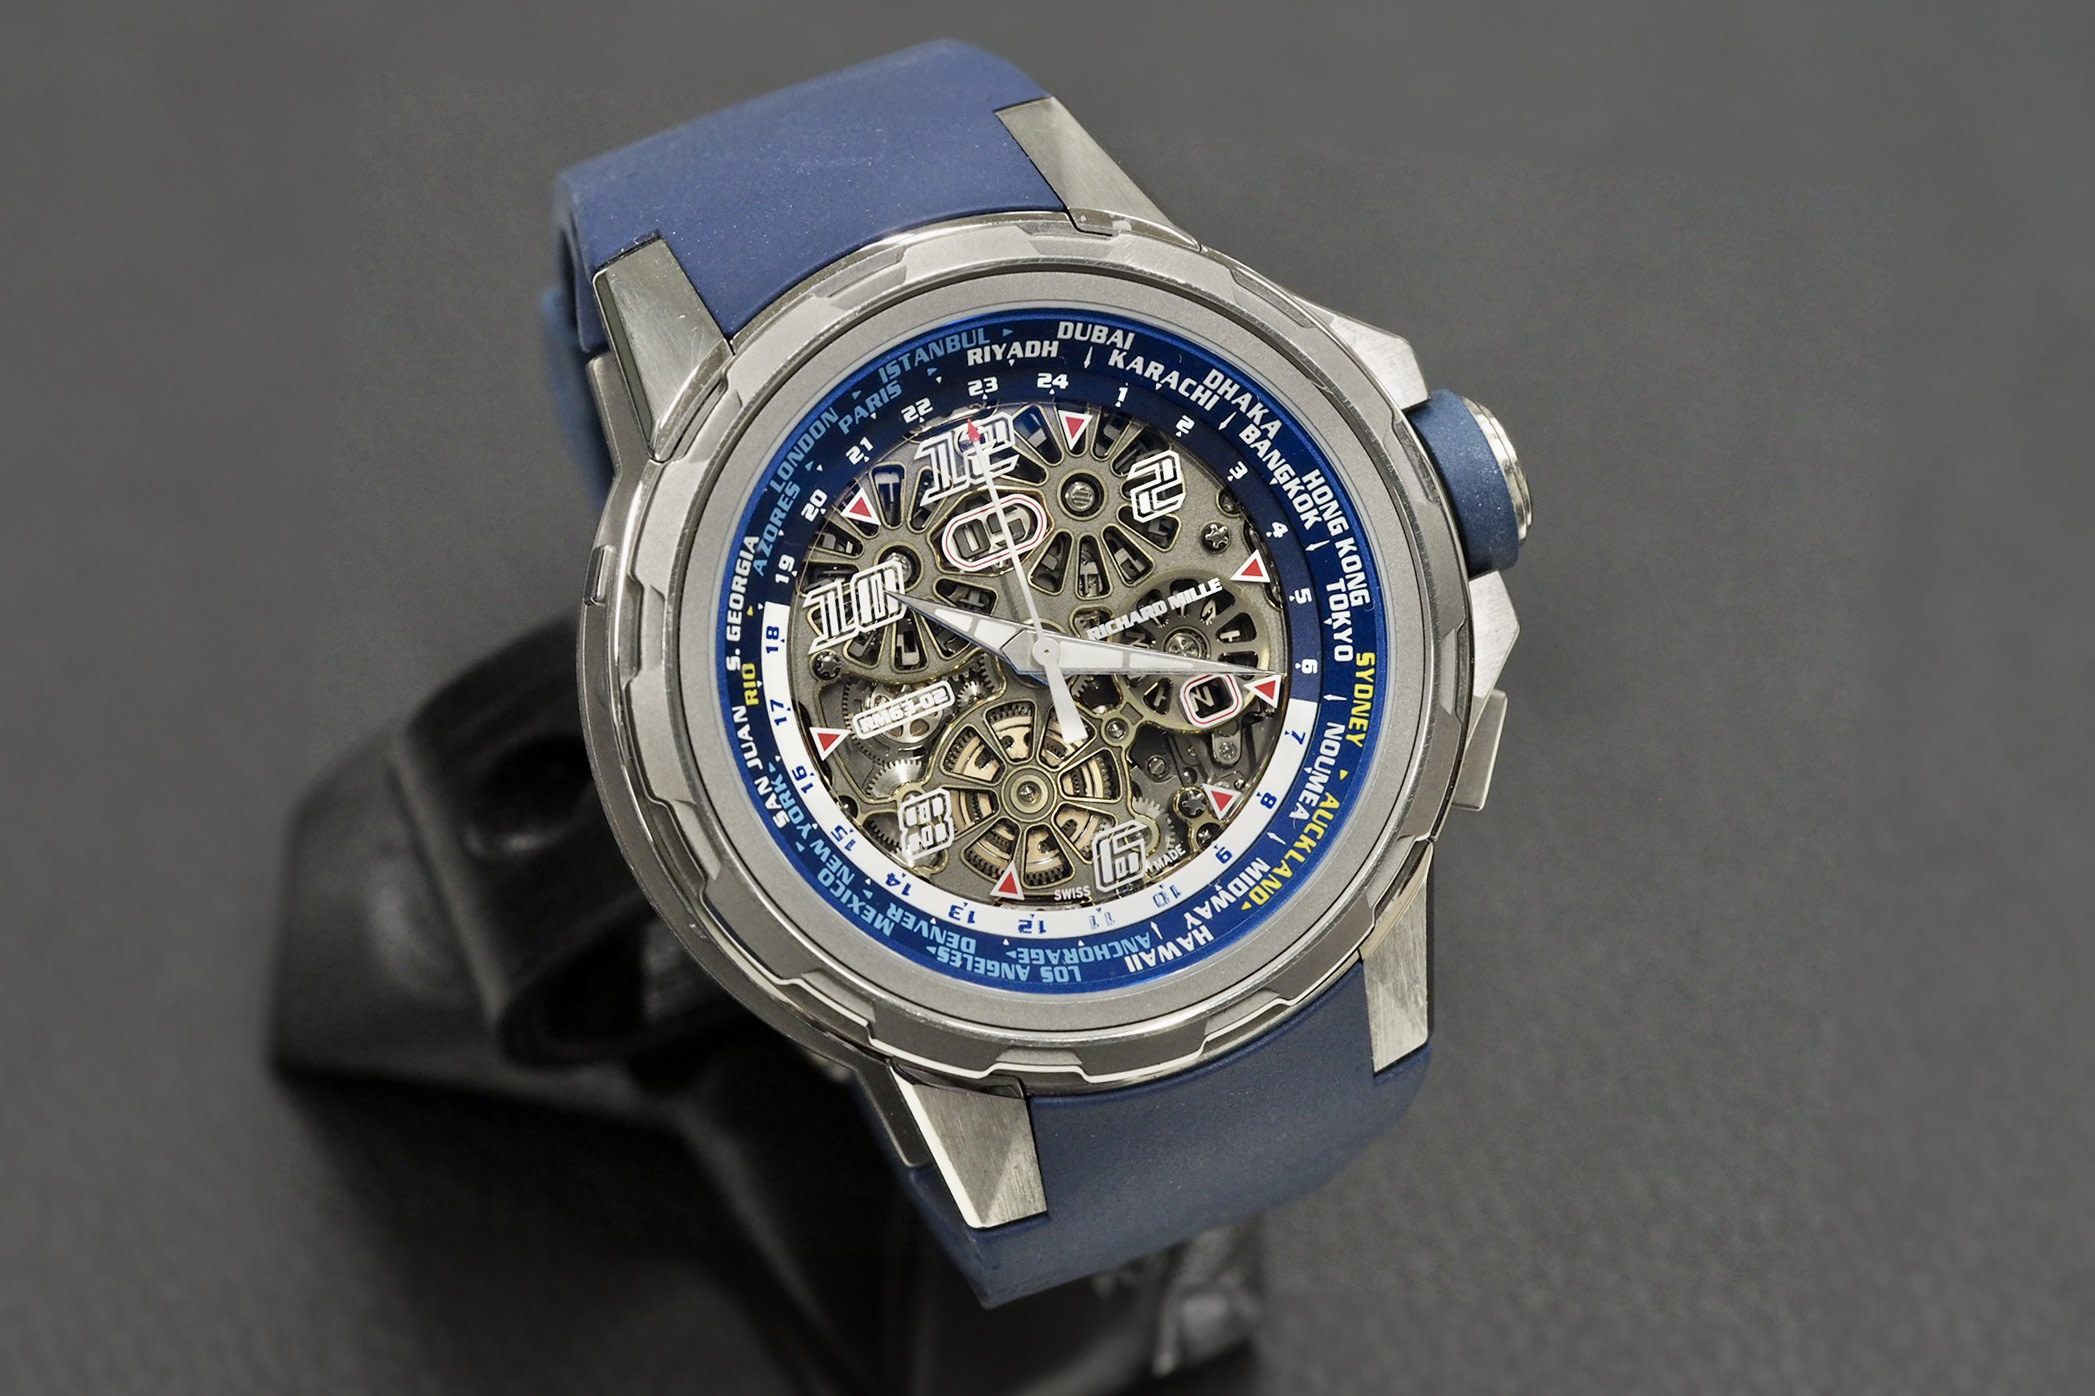 The RM63-02 combines Richard Mille's avante-garde design with a traditional and highly practical complication. 1